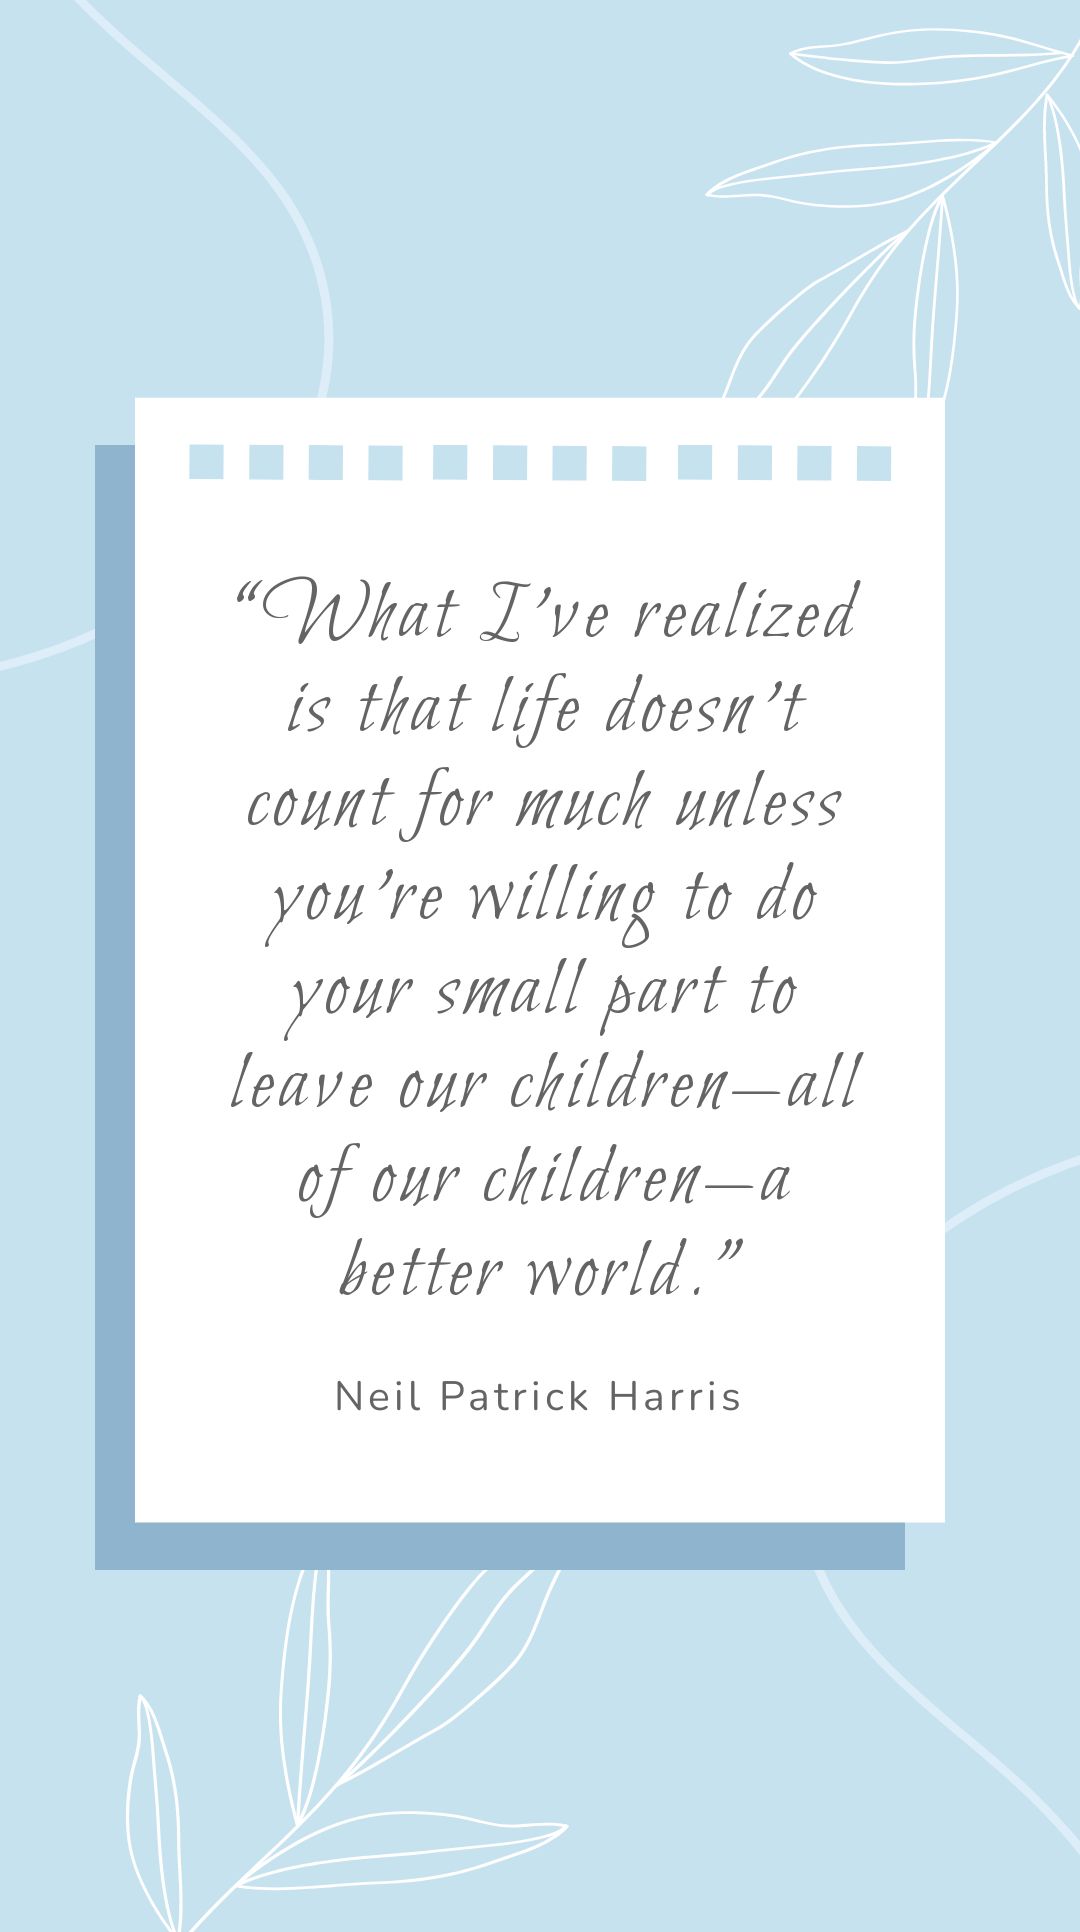 Neil Patrick Harris - “What I’ve realized is that life doesn’t count for much unless you’re willing to do your small part to leave our children—all of our children—a better world.”